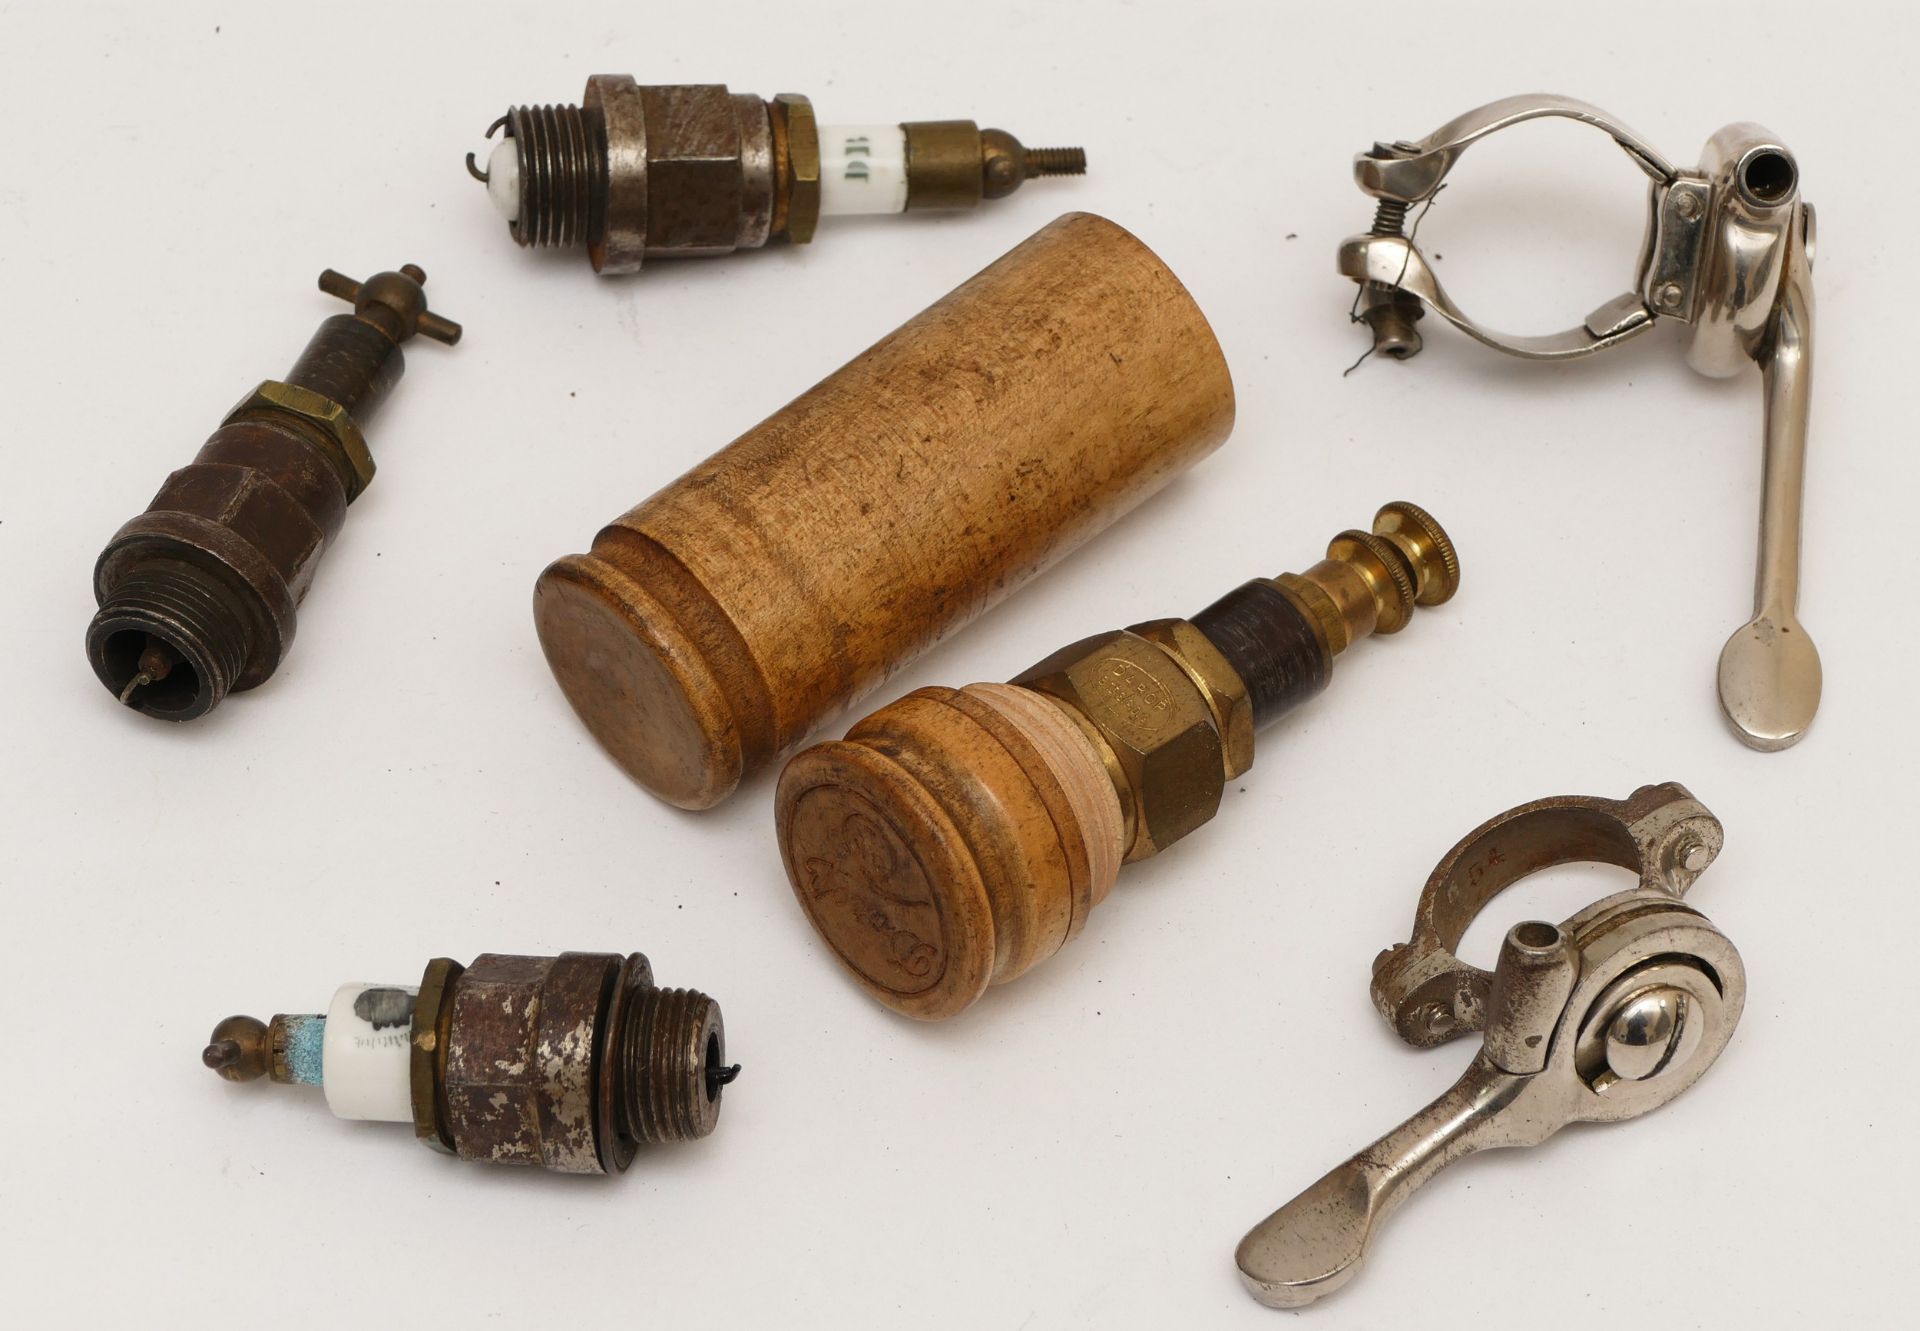 A veteran Darop brass spark plug, in wooden case, three other vintage spark plugs and and two levers